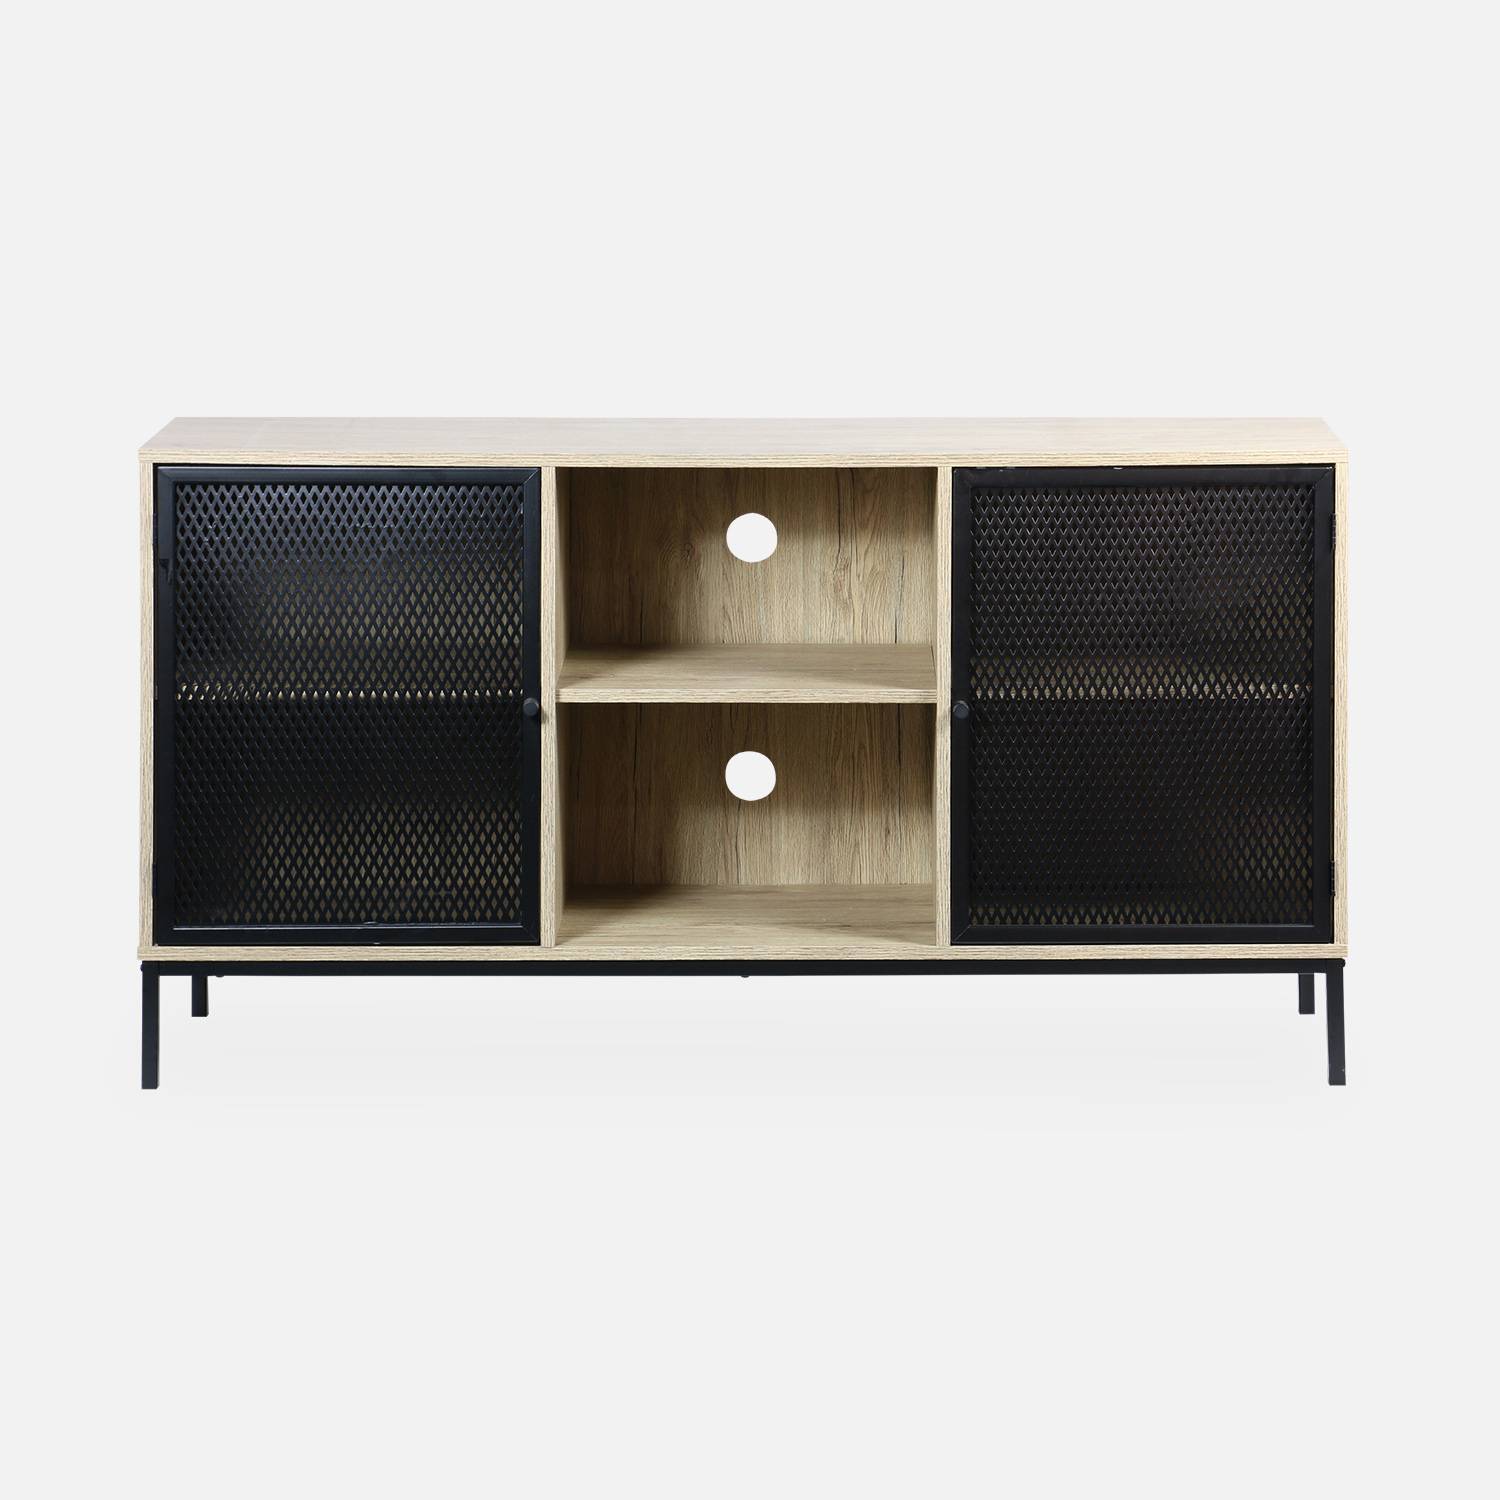 TV stand - metal and wood-effect - 2 doors and 6 compartments - Brooklyn,sweeek,Photo4